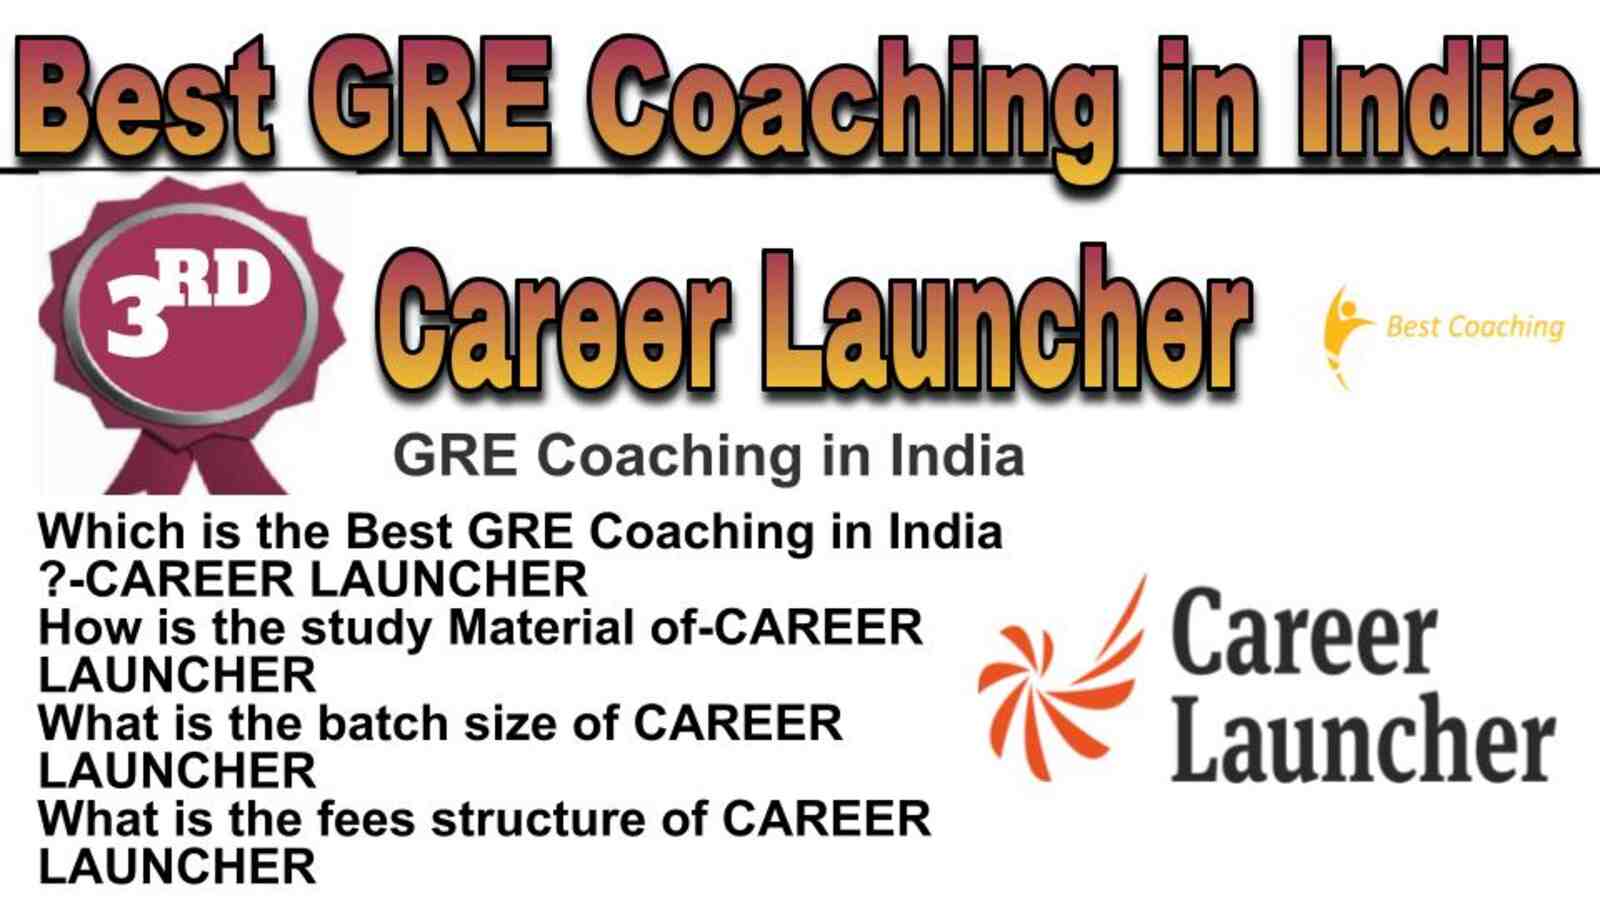 Rank 3 best GRE coaching in India